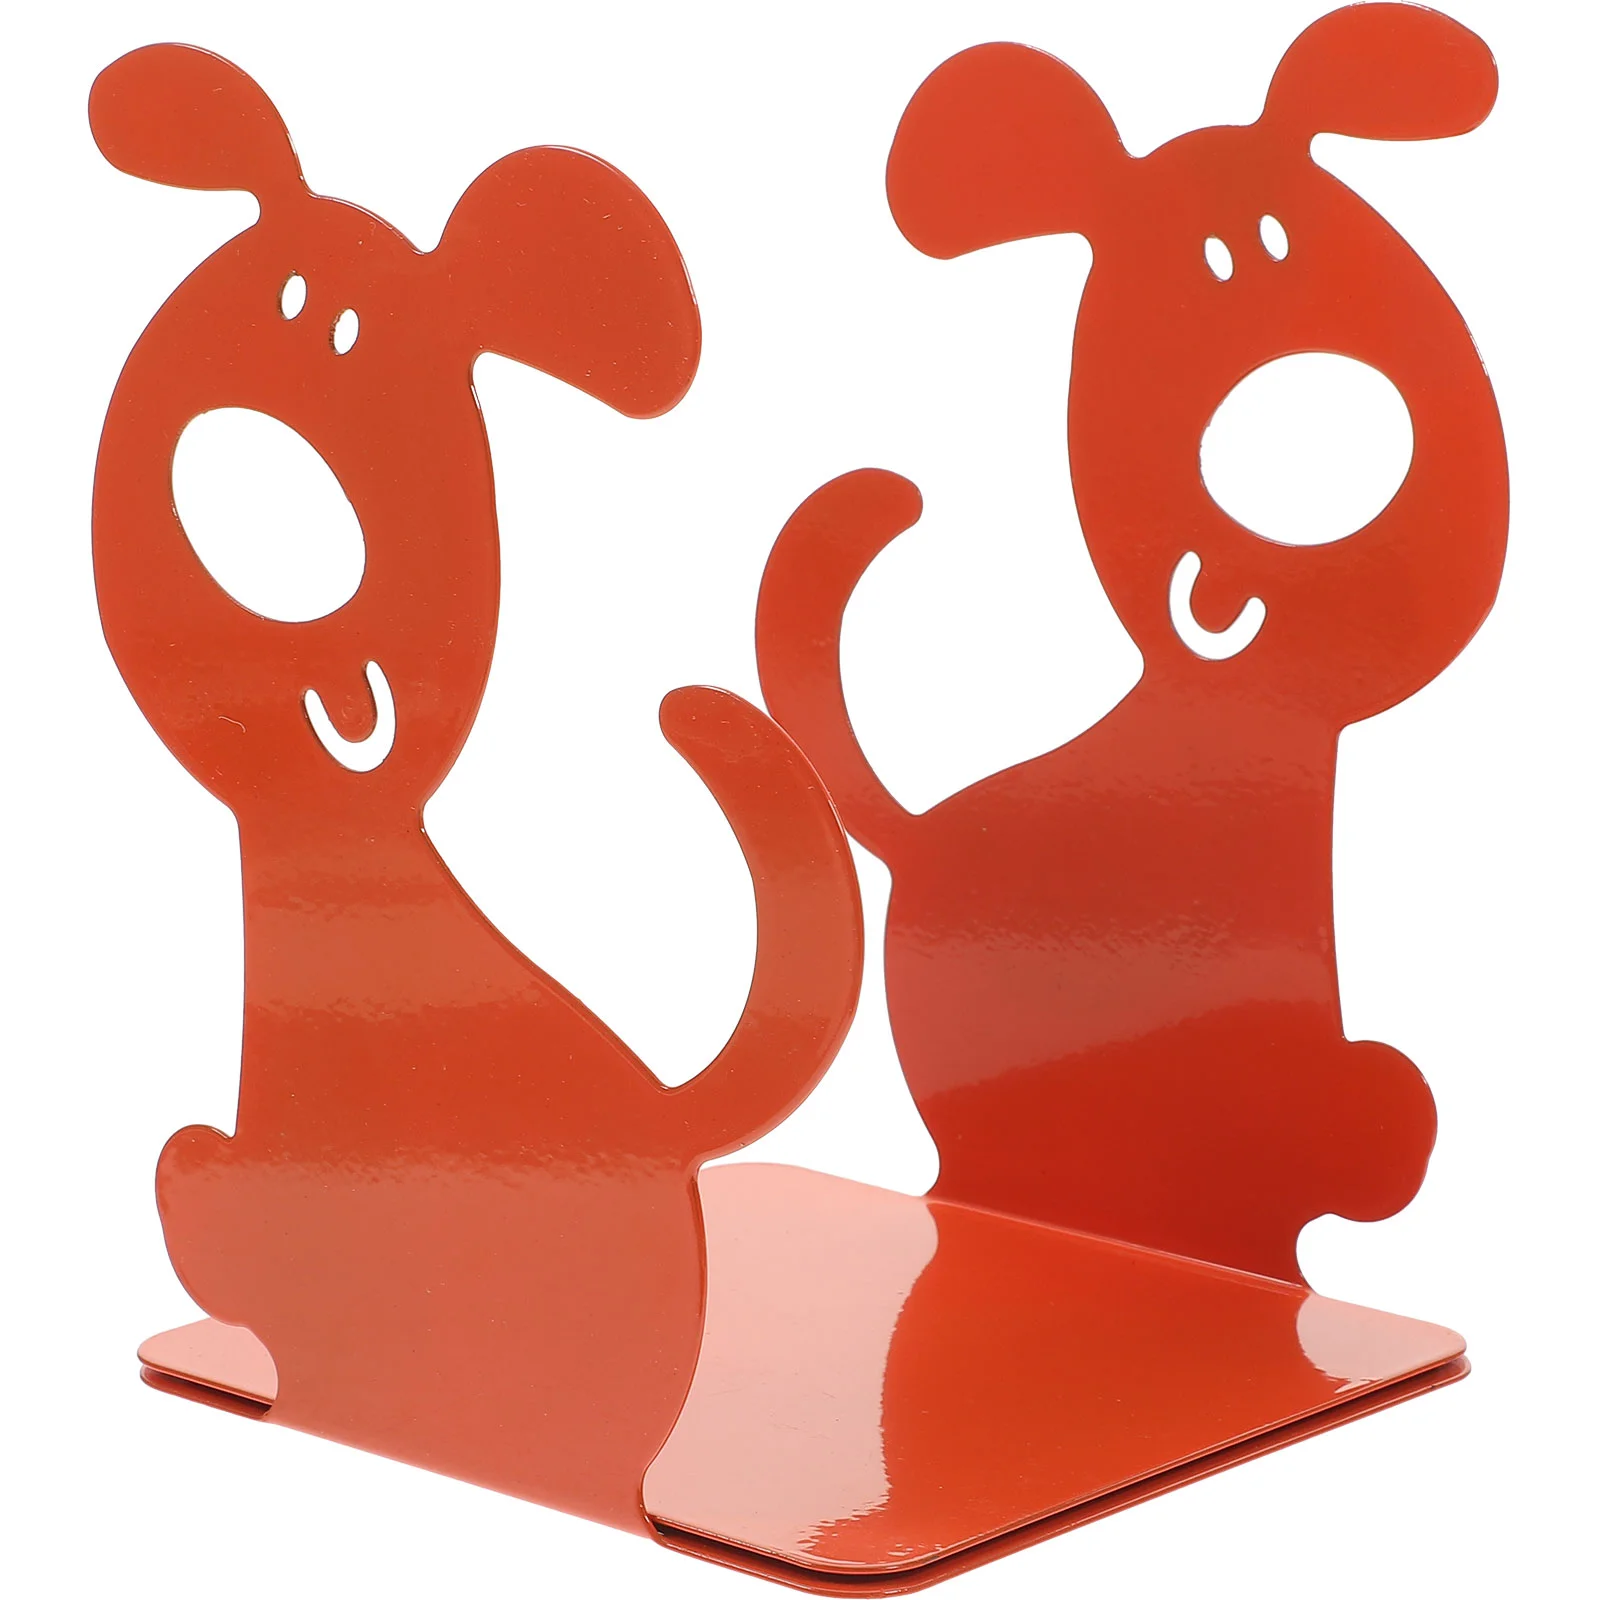 

2Pcs Book Ends Dog Shaped Bookends Non-skid Bookend Metal Book Stopper for Office Bookshelf